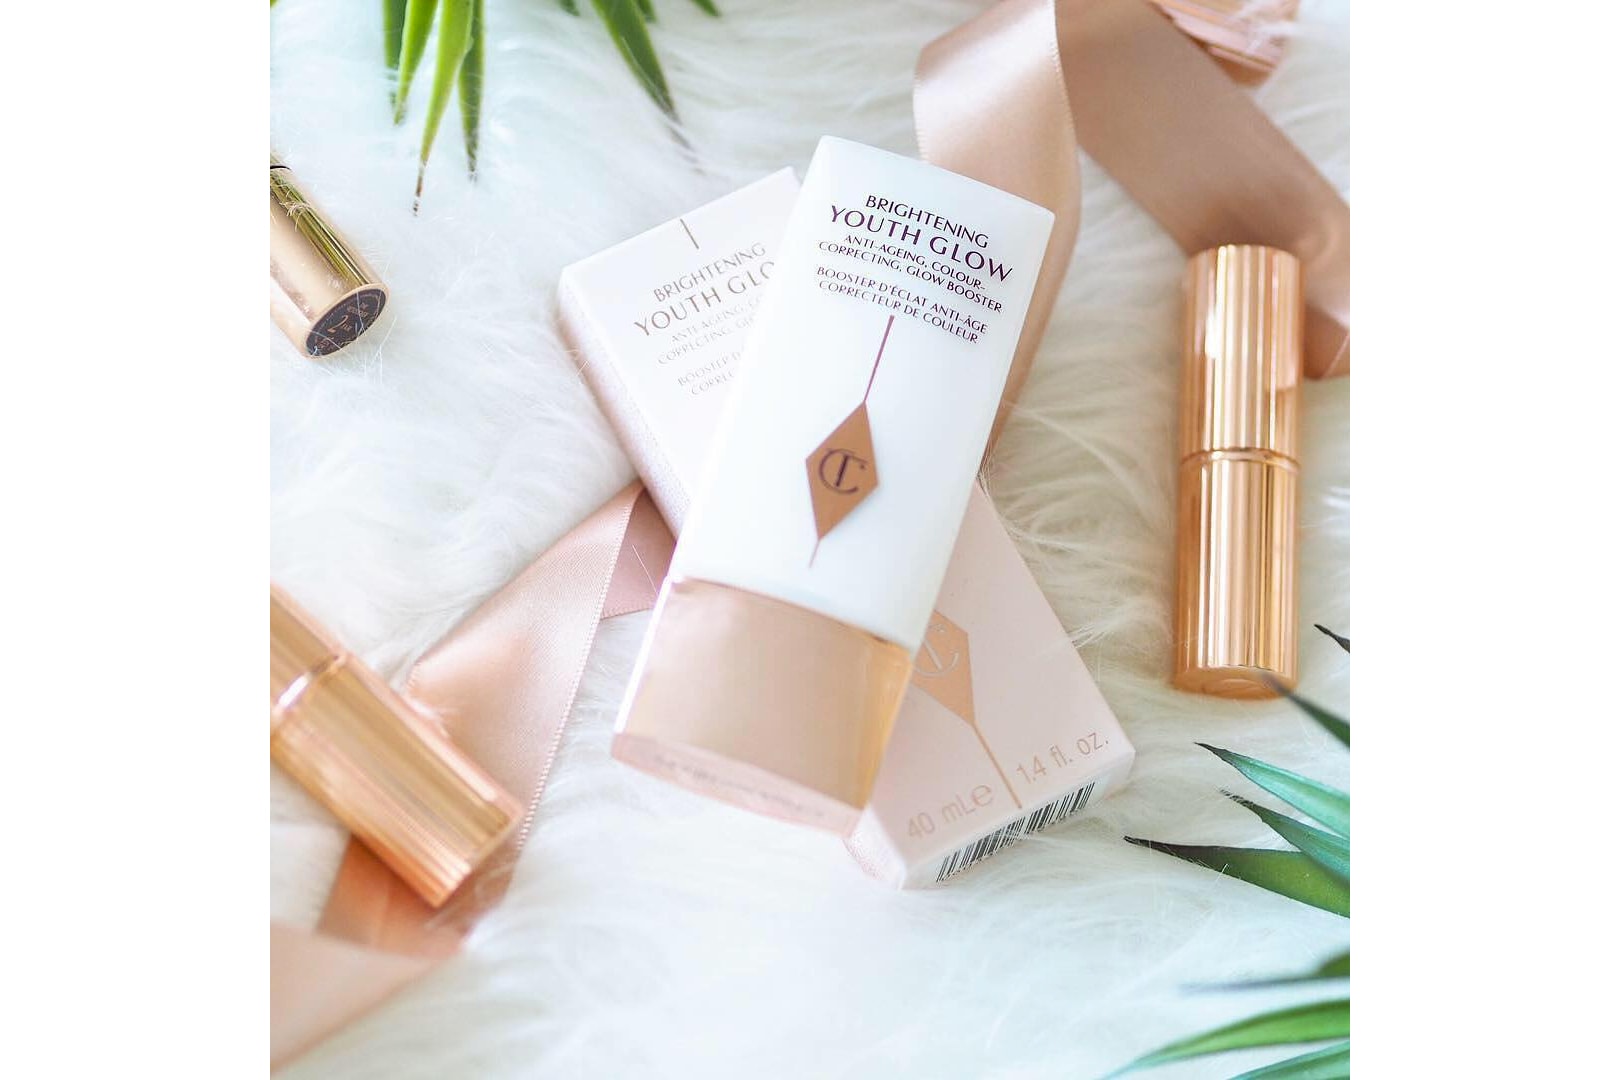 charlotte tilbury brightening youth glow primer review cruelty free